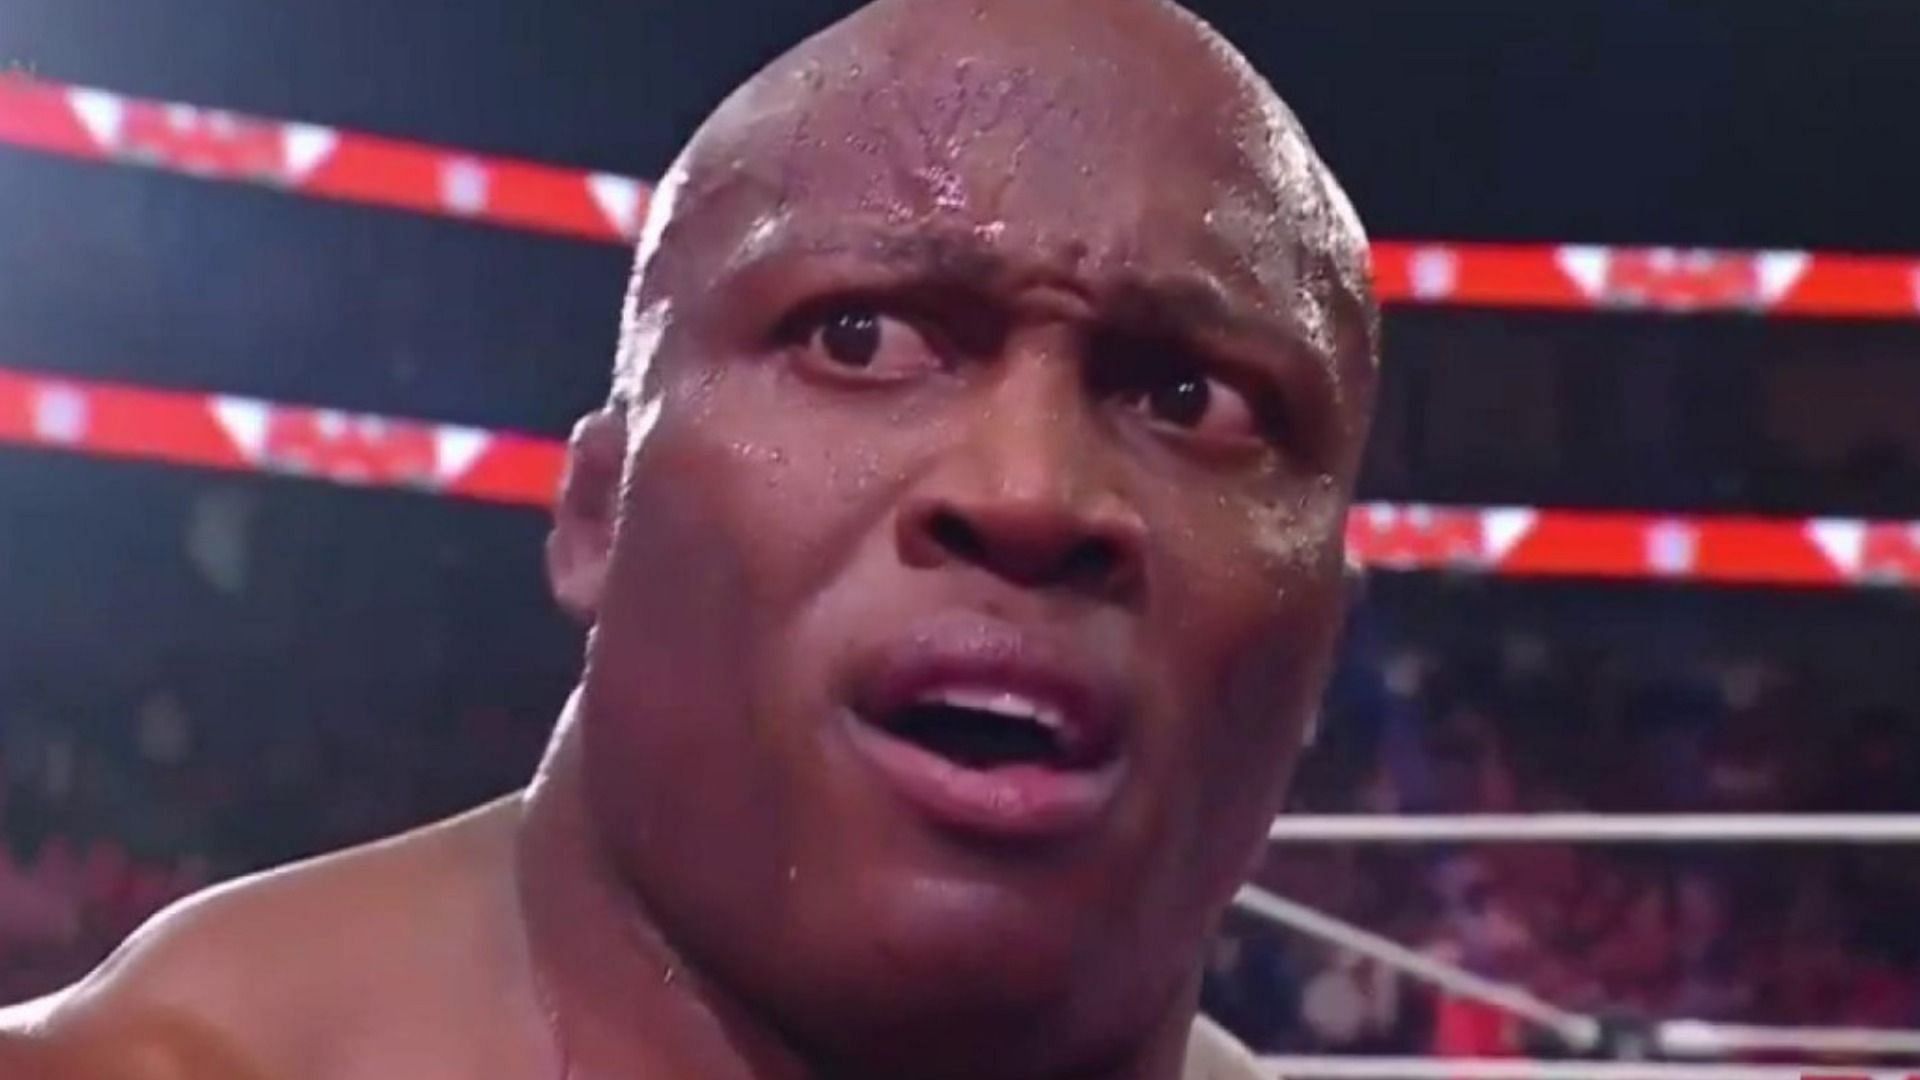 Bobby Lashley reacting to getting fired by Adam Pearce.